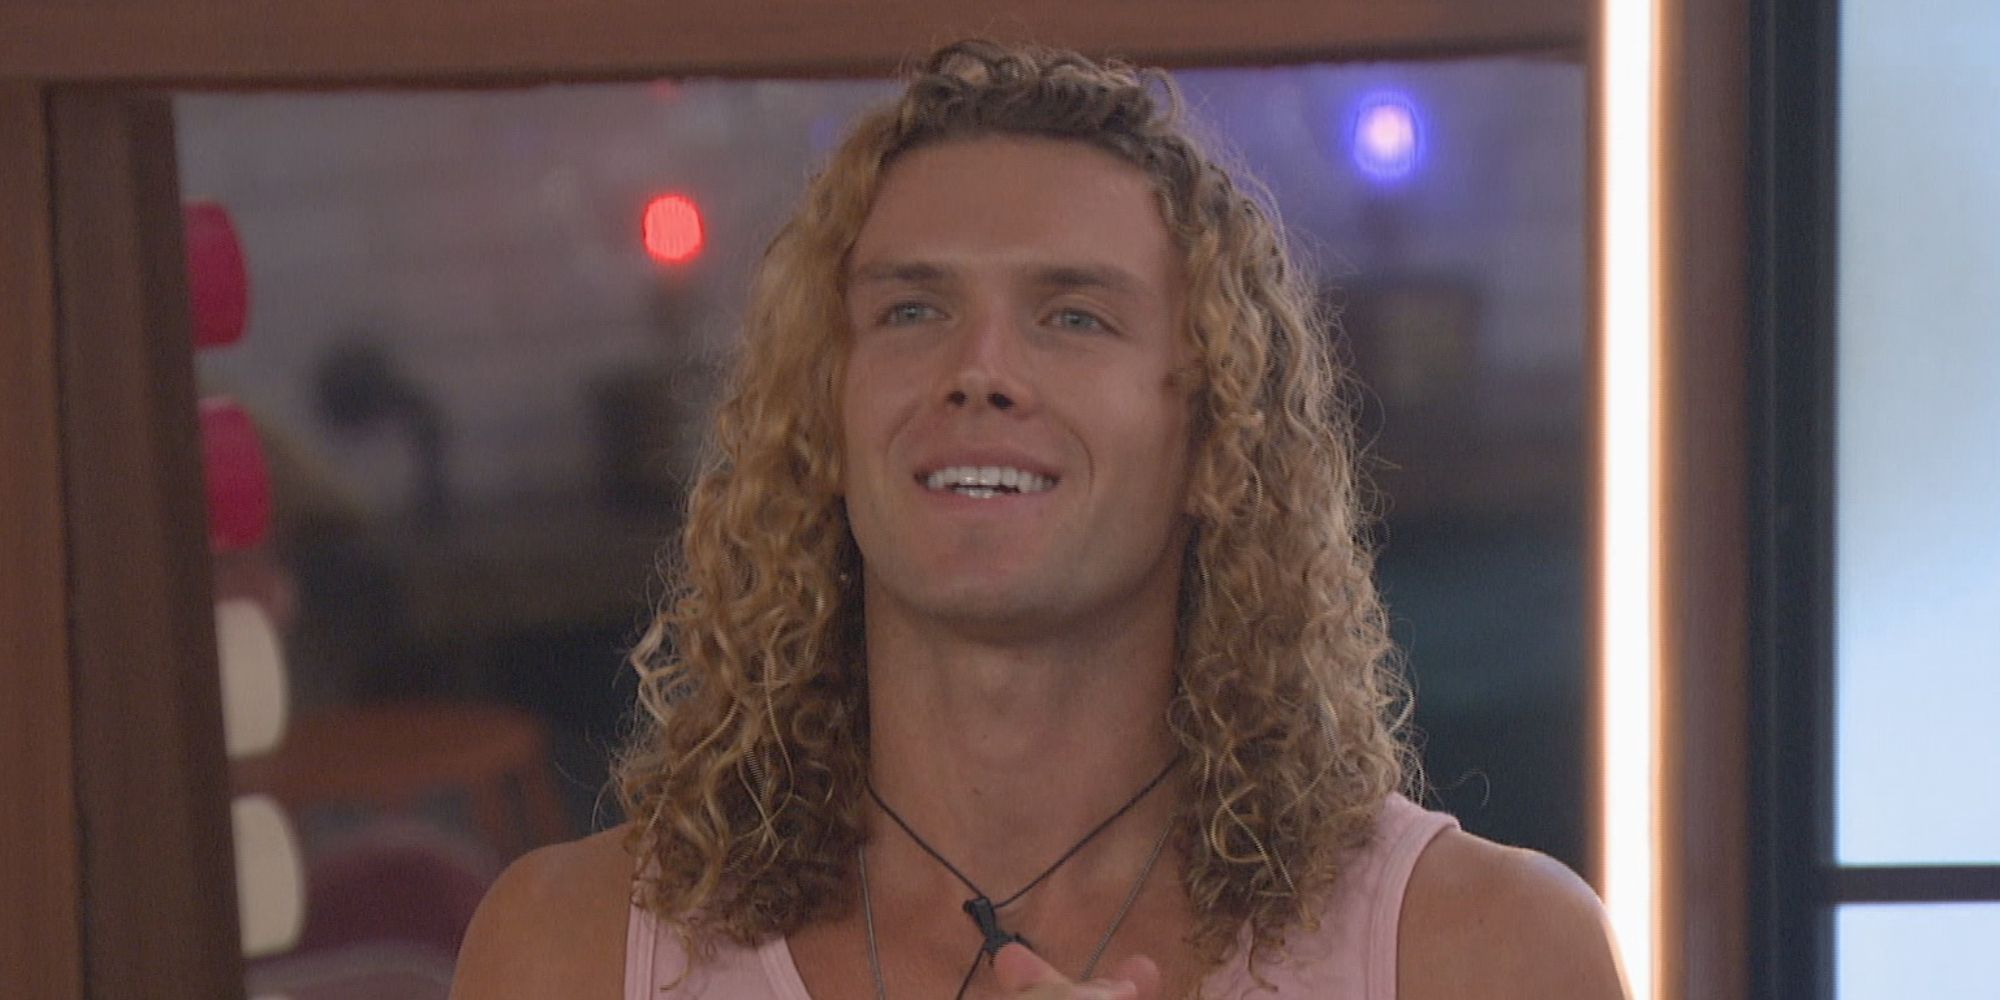 Tyler Crispen from Big Brother wearing a pink tank top.